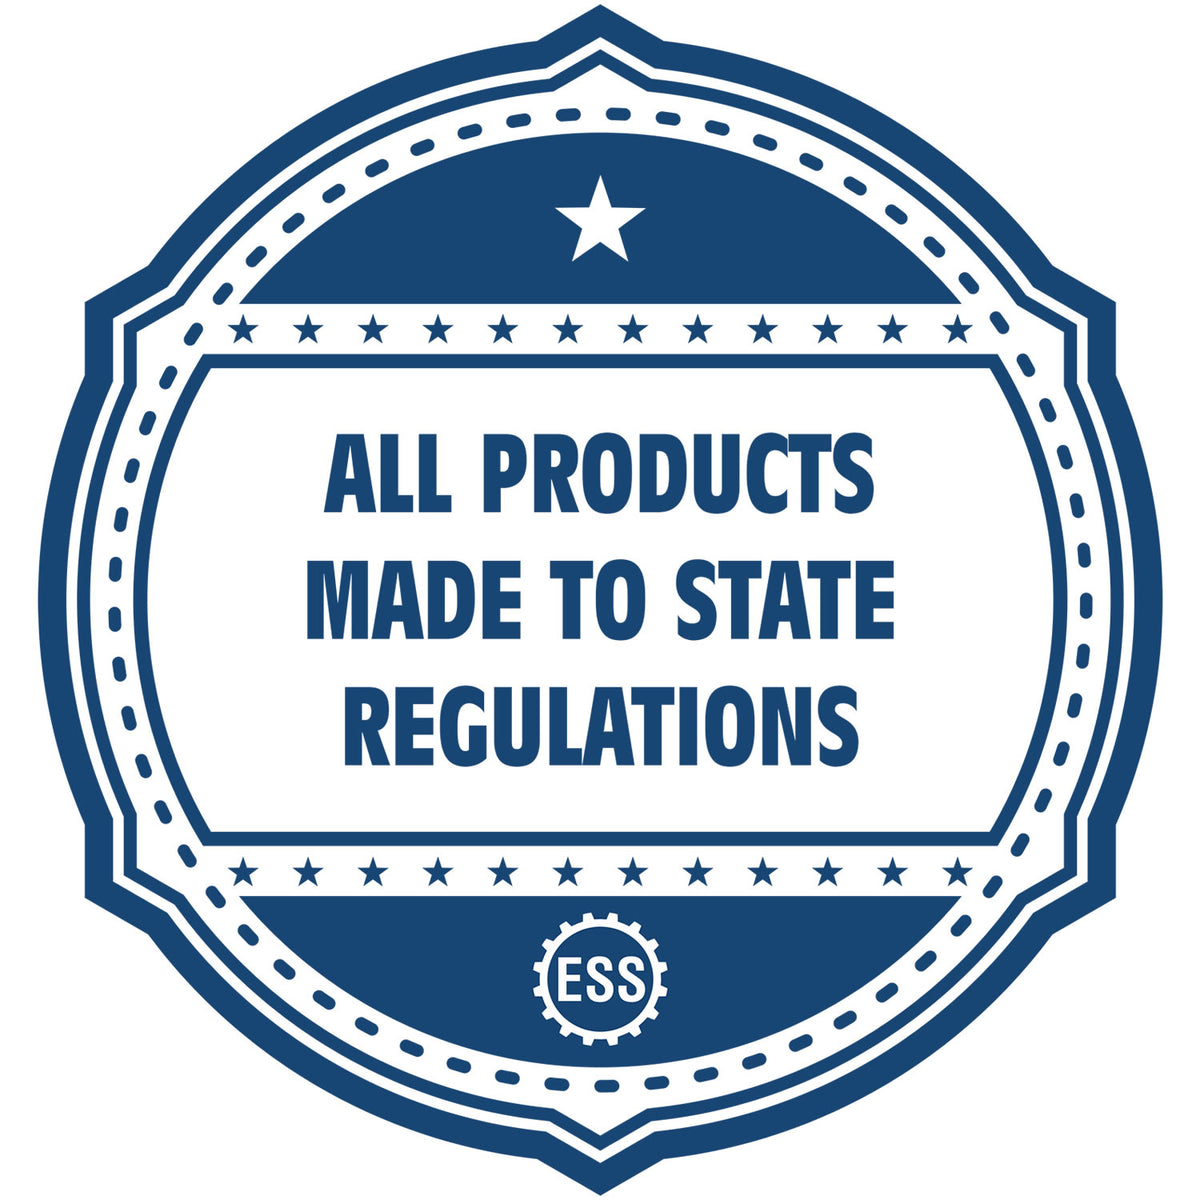 An icon or badge element for the Self-Inking Montana Landscape Architect Stamp showing that this product is made in compliance with state regulations.